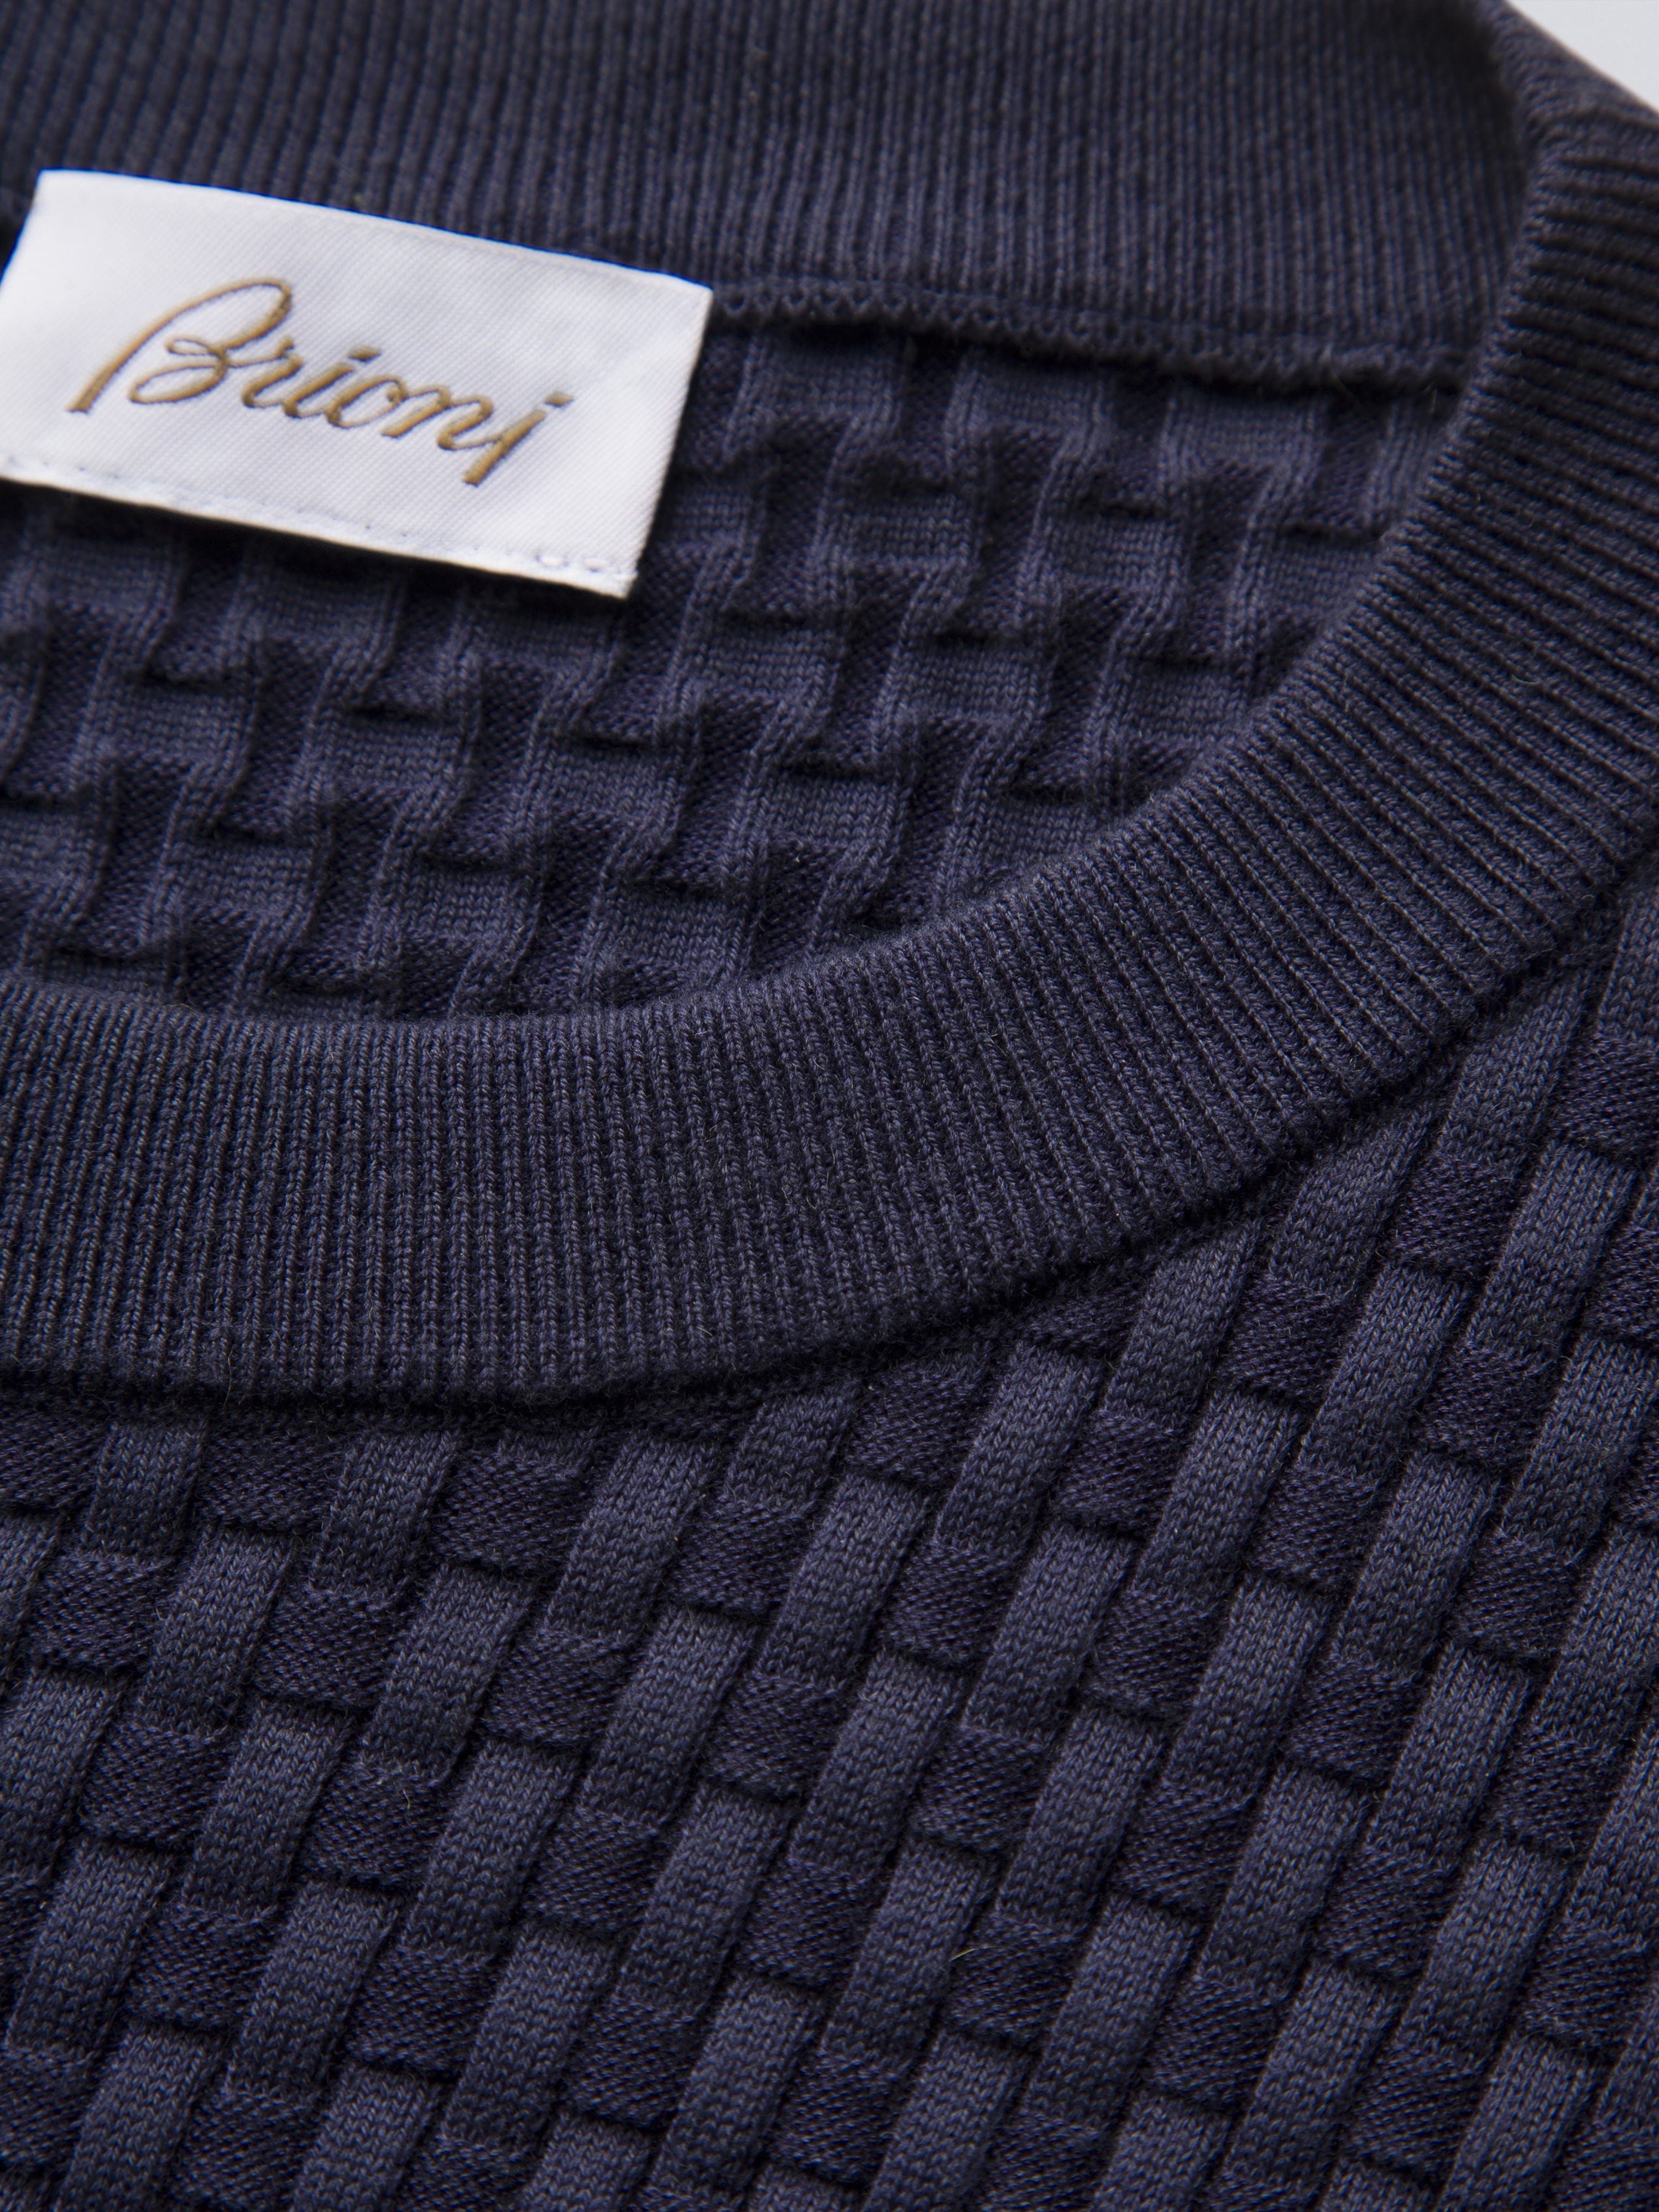 Brioni Knitwear 'Essential' Navy Blue Long-sleeved Polo Shirt